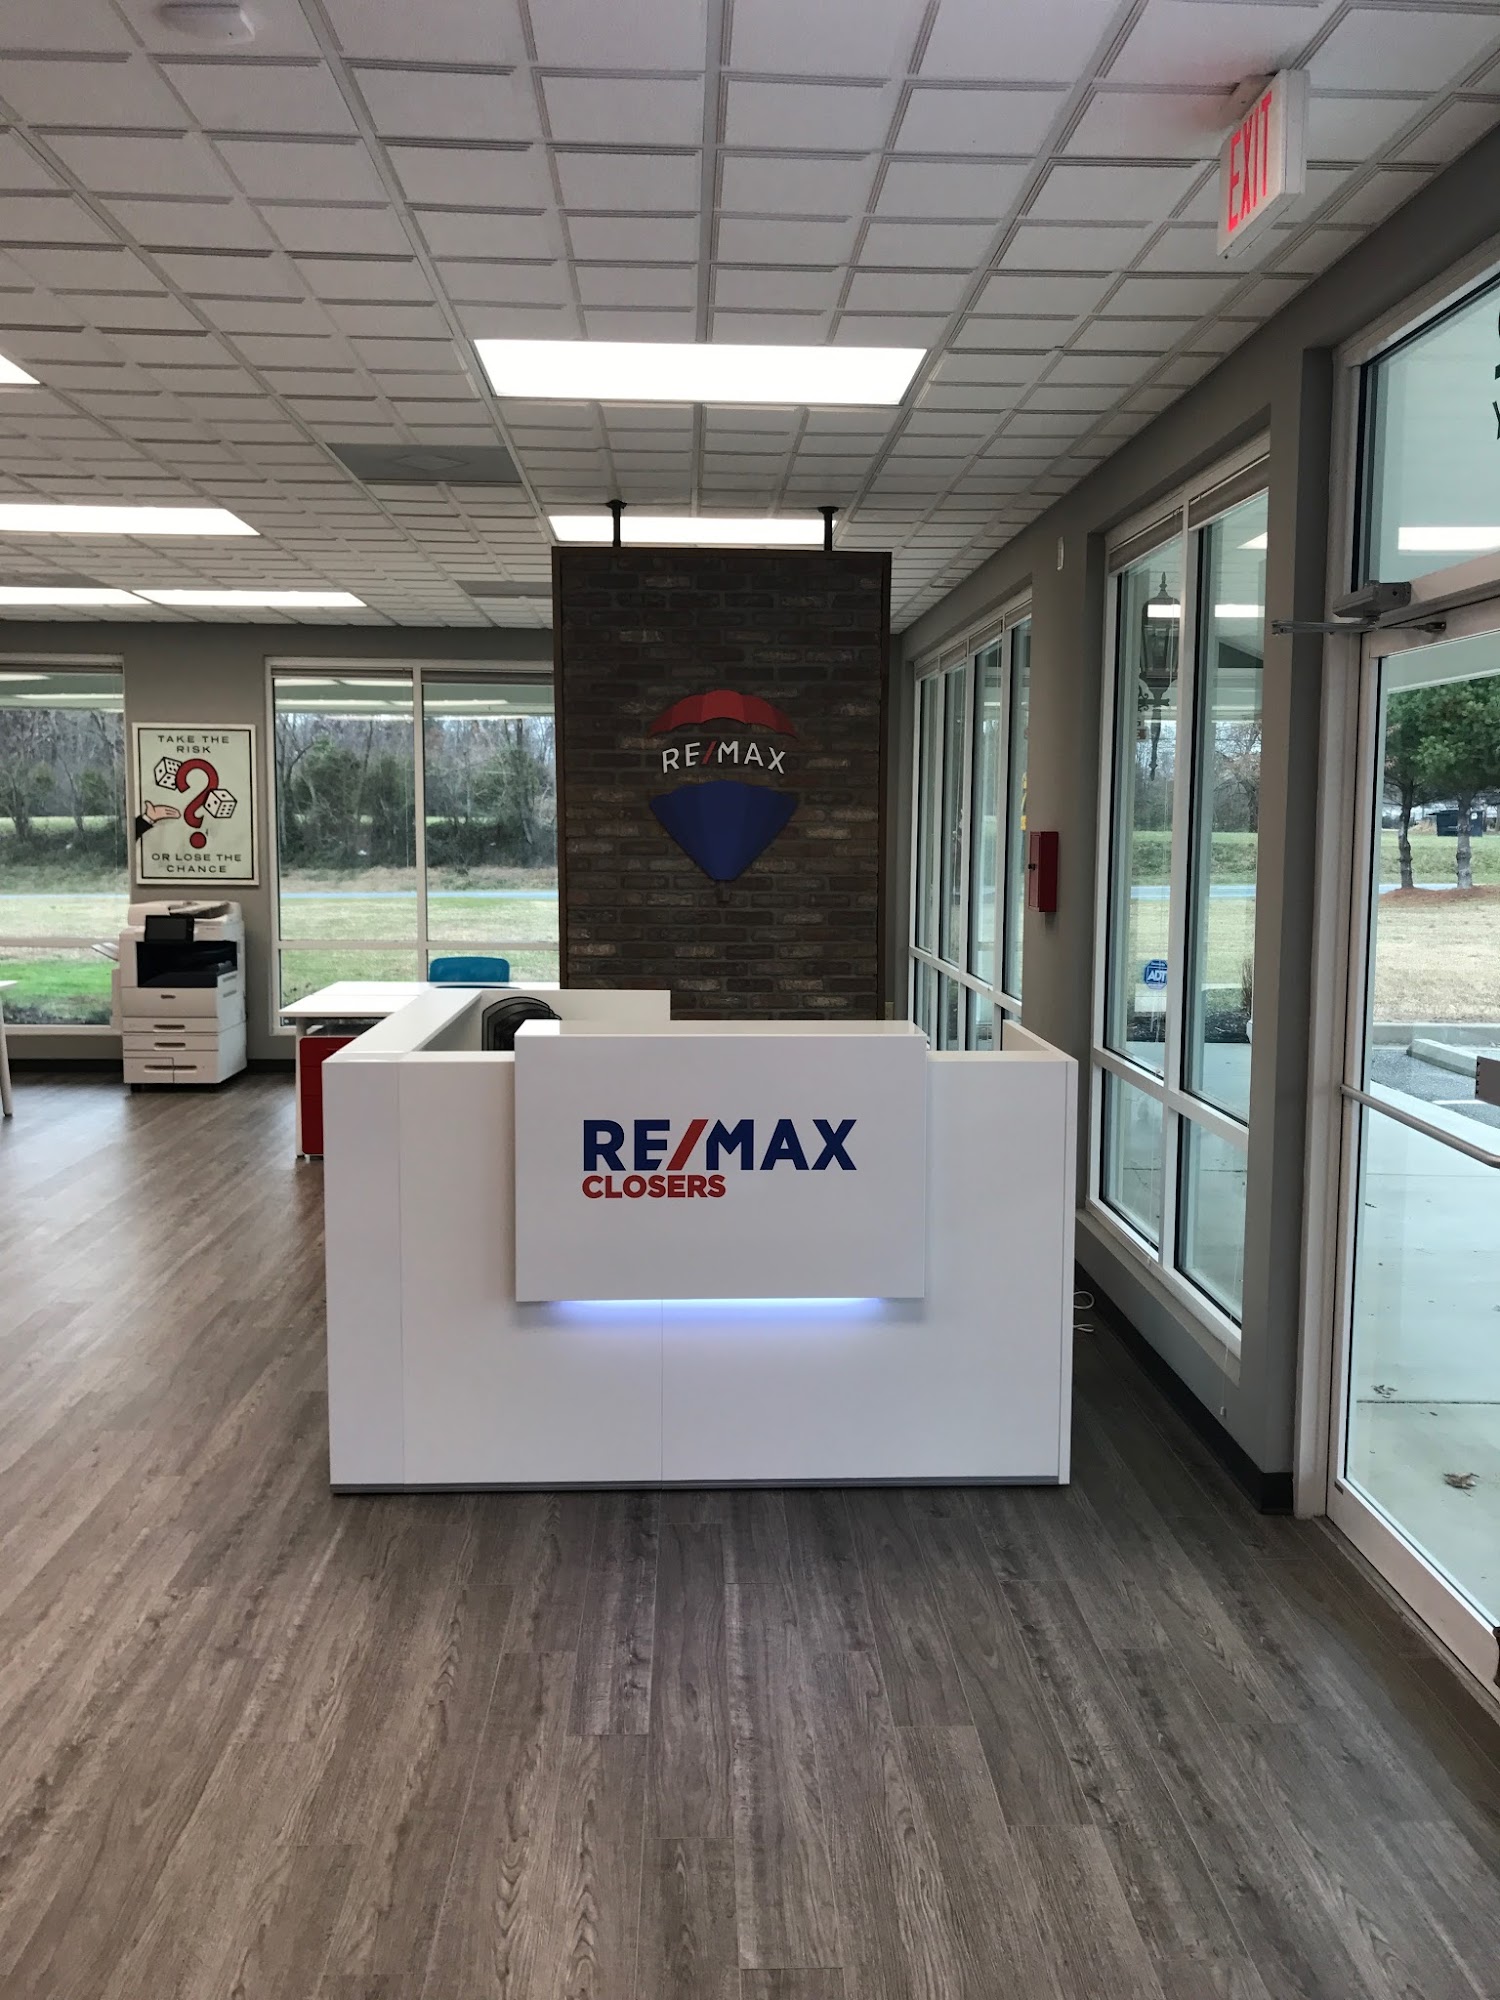 RE/MAX Closers